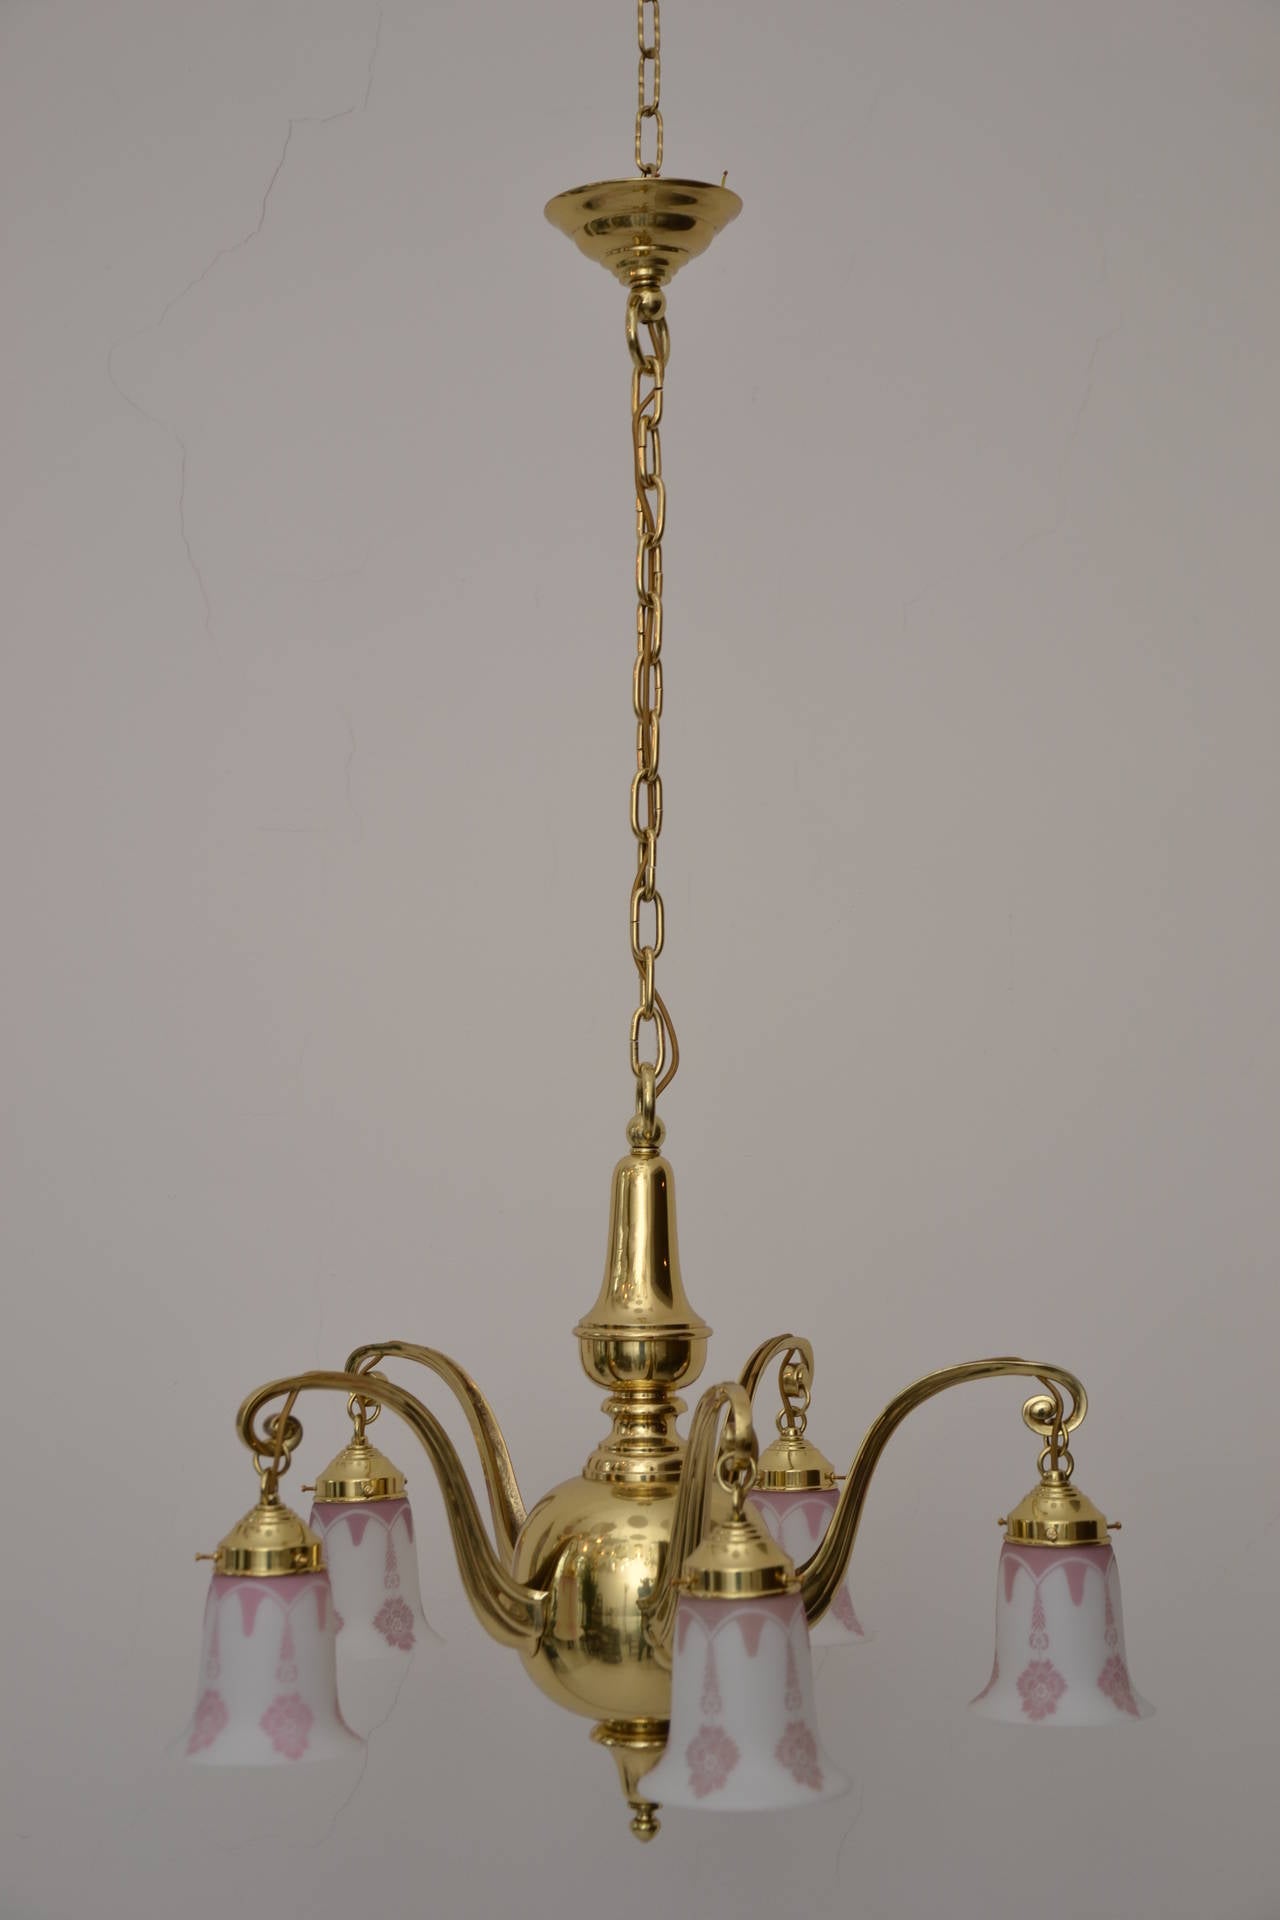 5 arms Historistic ceiling lamp with original glass shades
Brass polished and stove enamelled